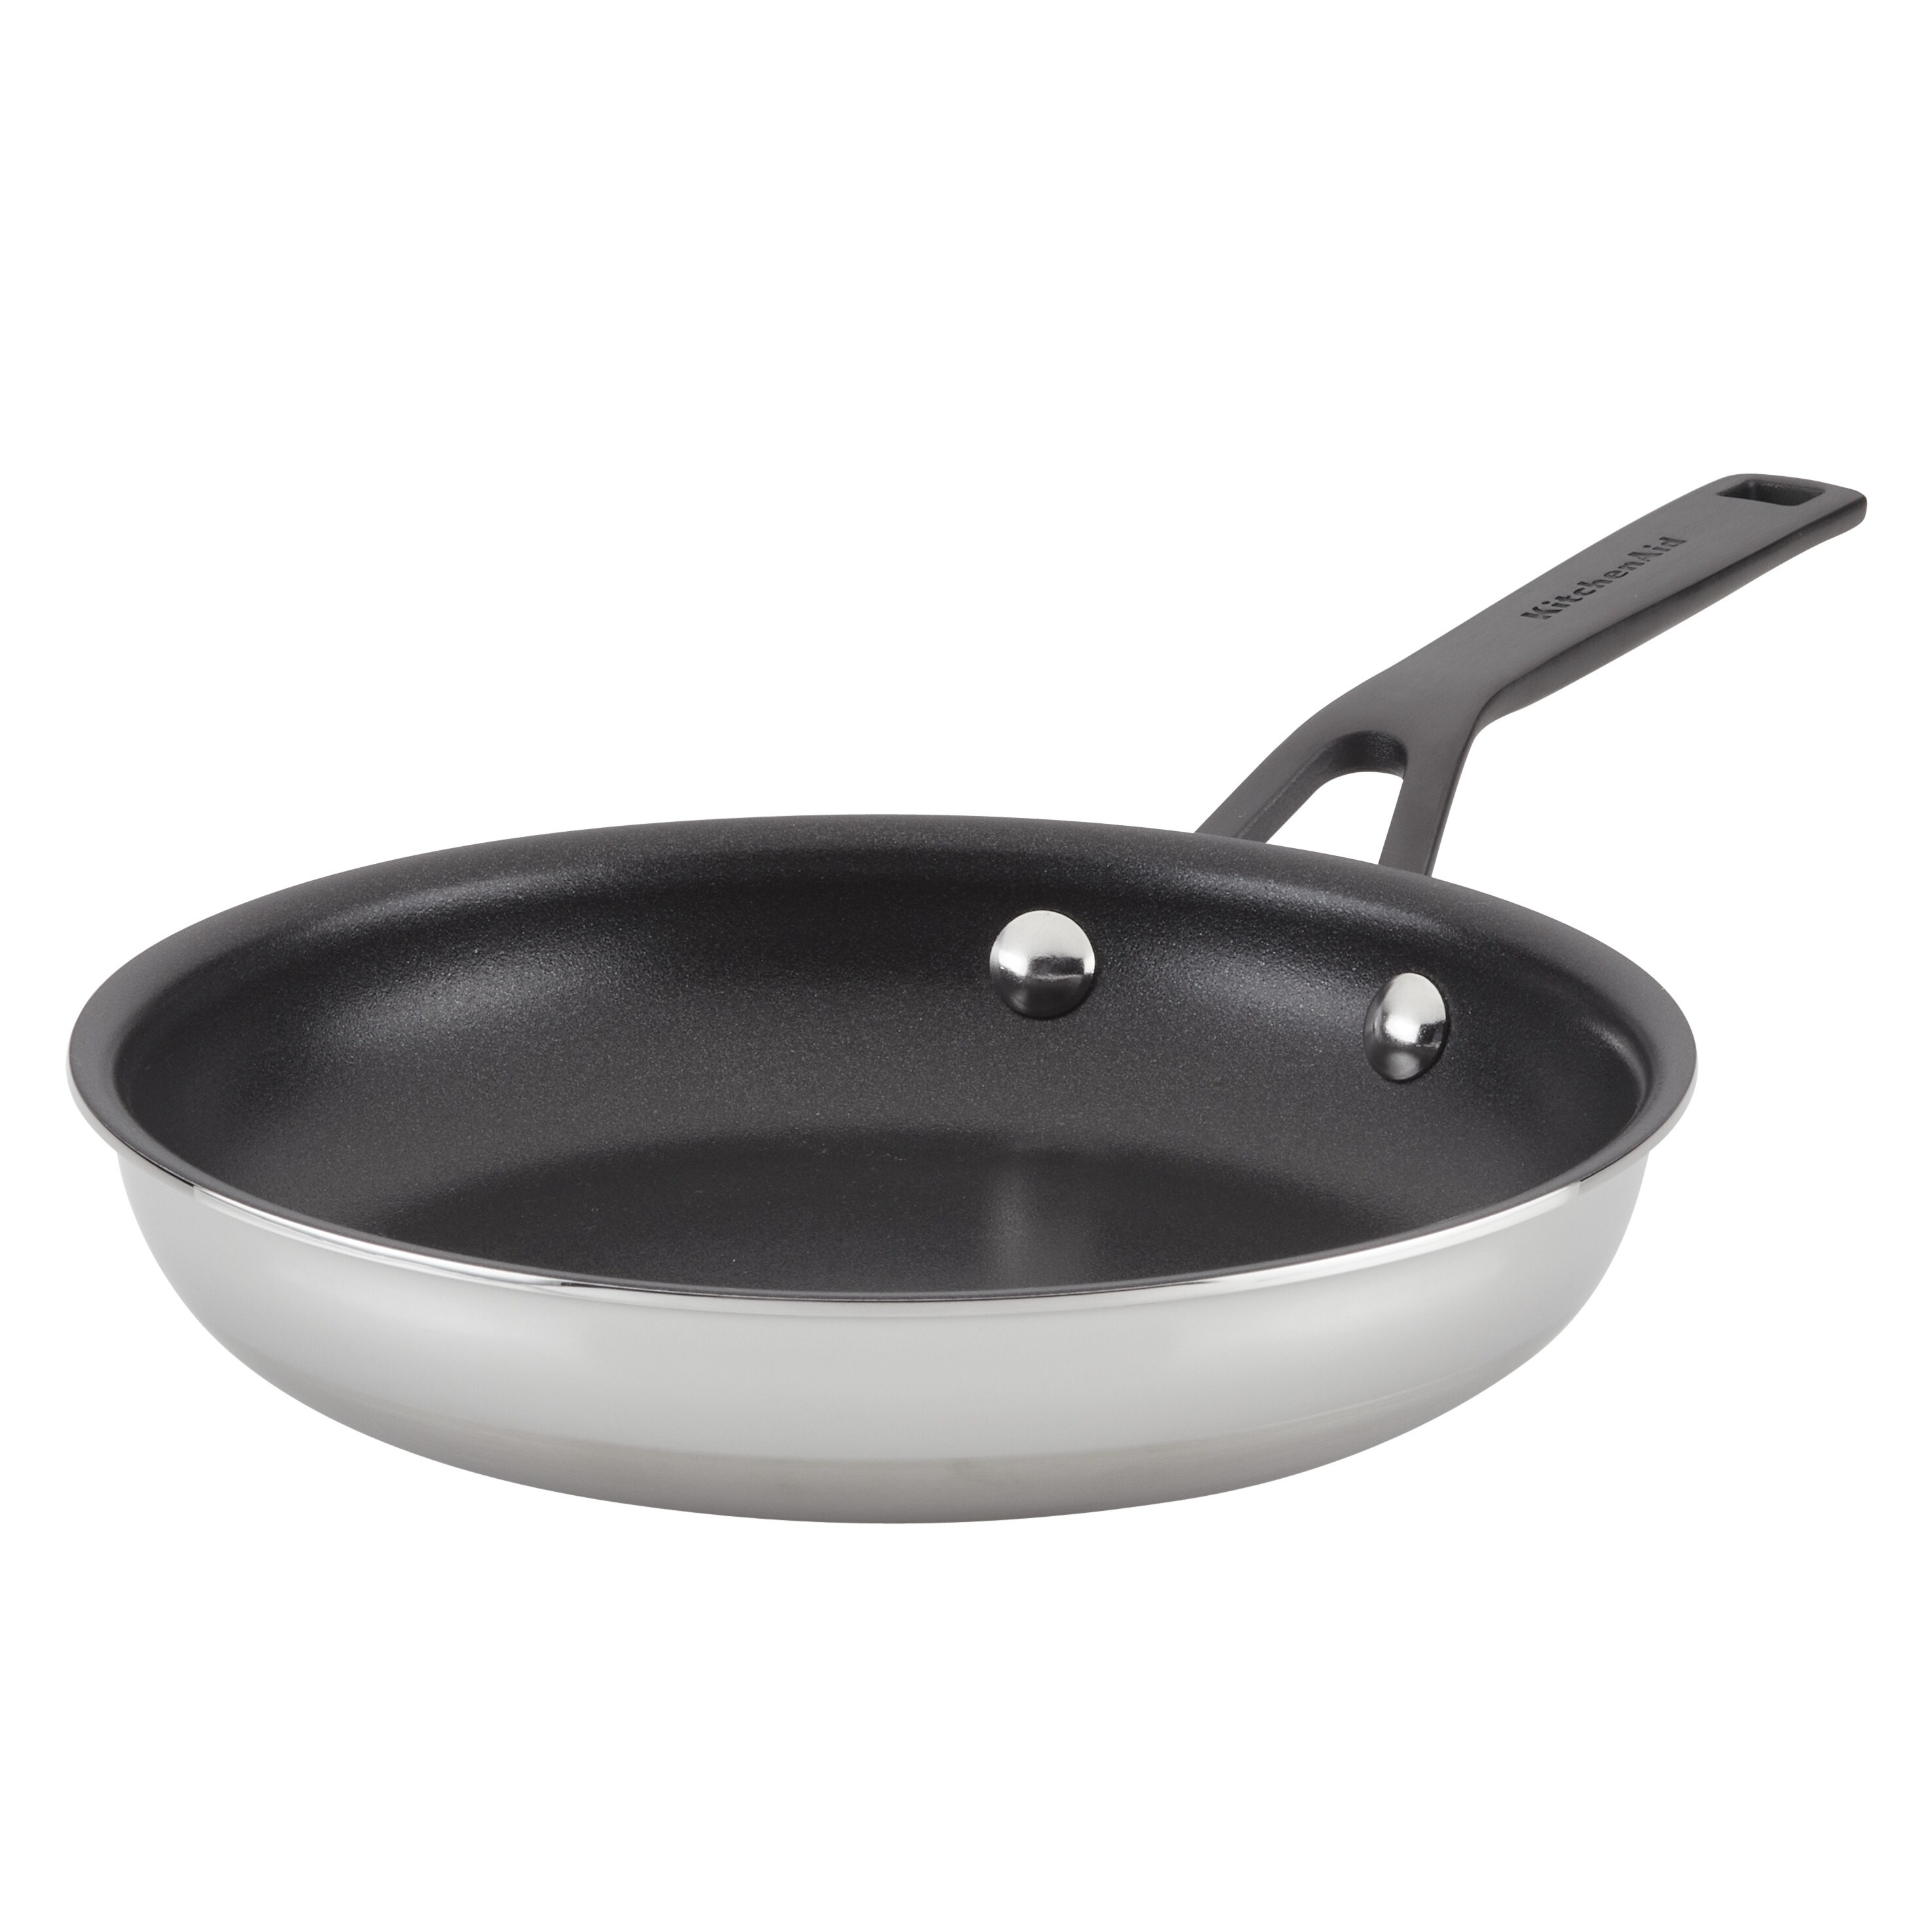 KitchenAid 5-Ply Clad Stainless Steel Frying Pan Set, 2pc - Bed Bath &  Beyond - 35346649